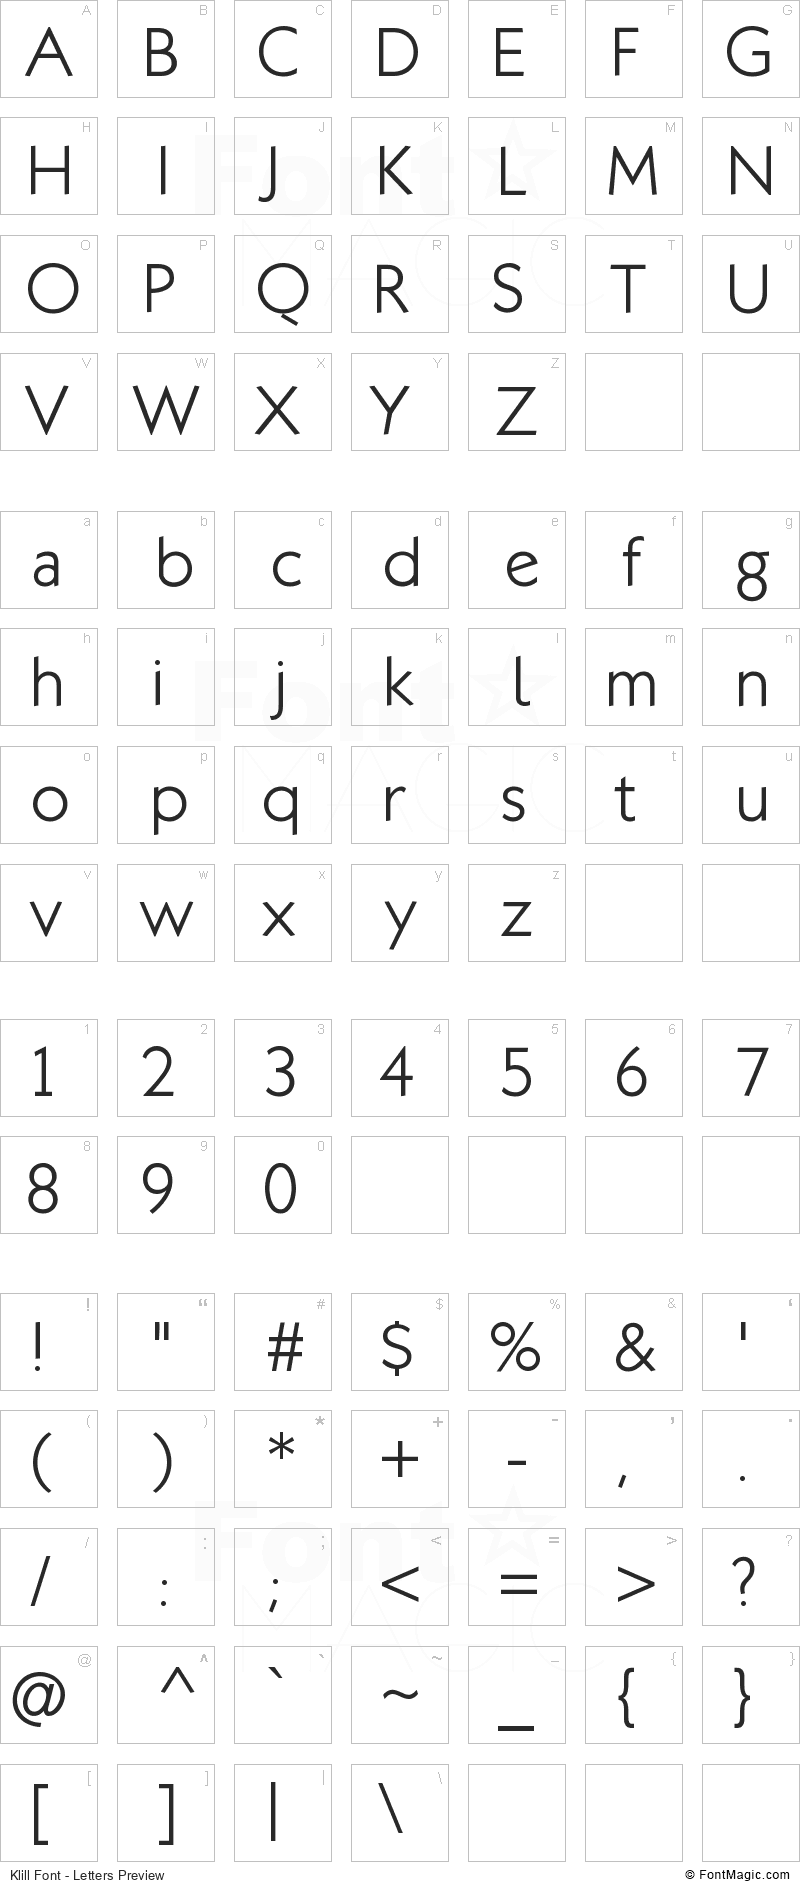 Klill Font - All Latters Preview Chart